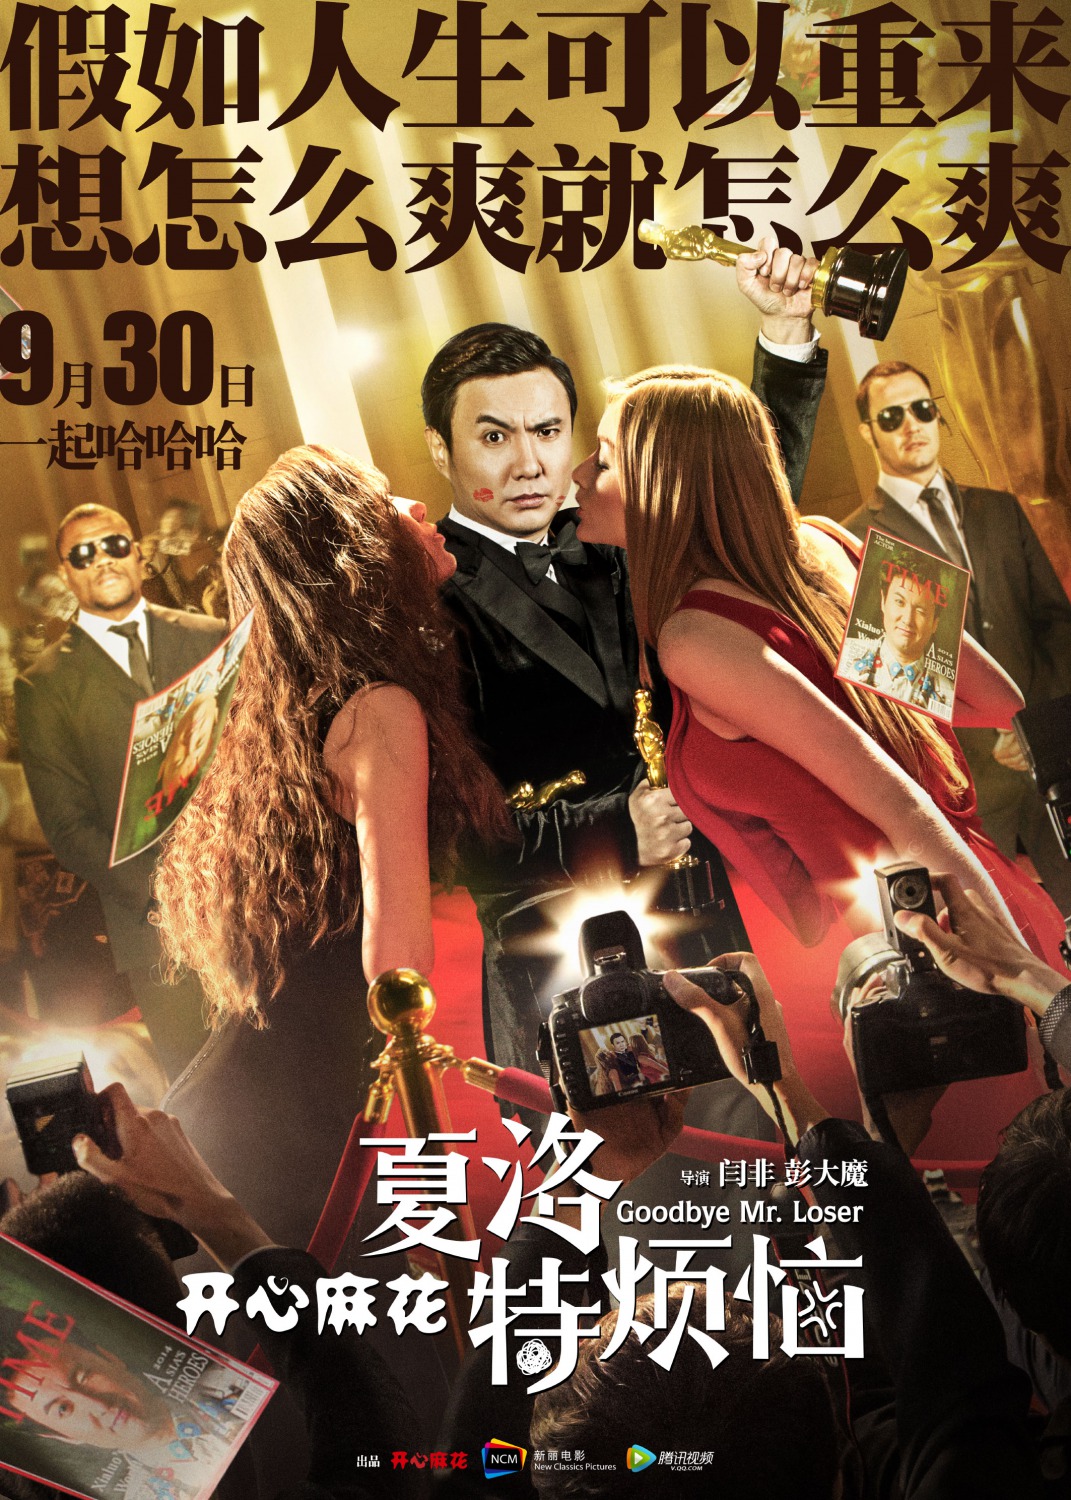 Extra Large Movie Poster Image for Xia Luo te fan nao (#1 of 4)